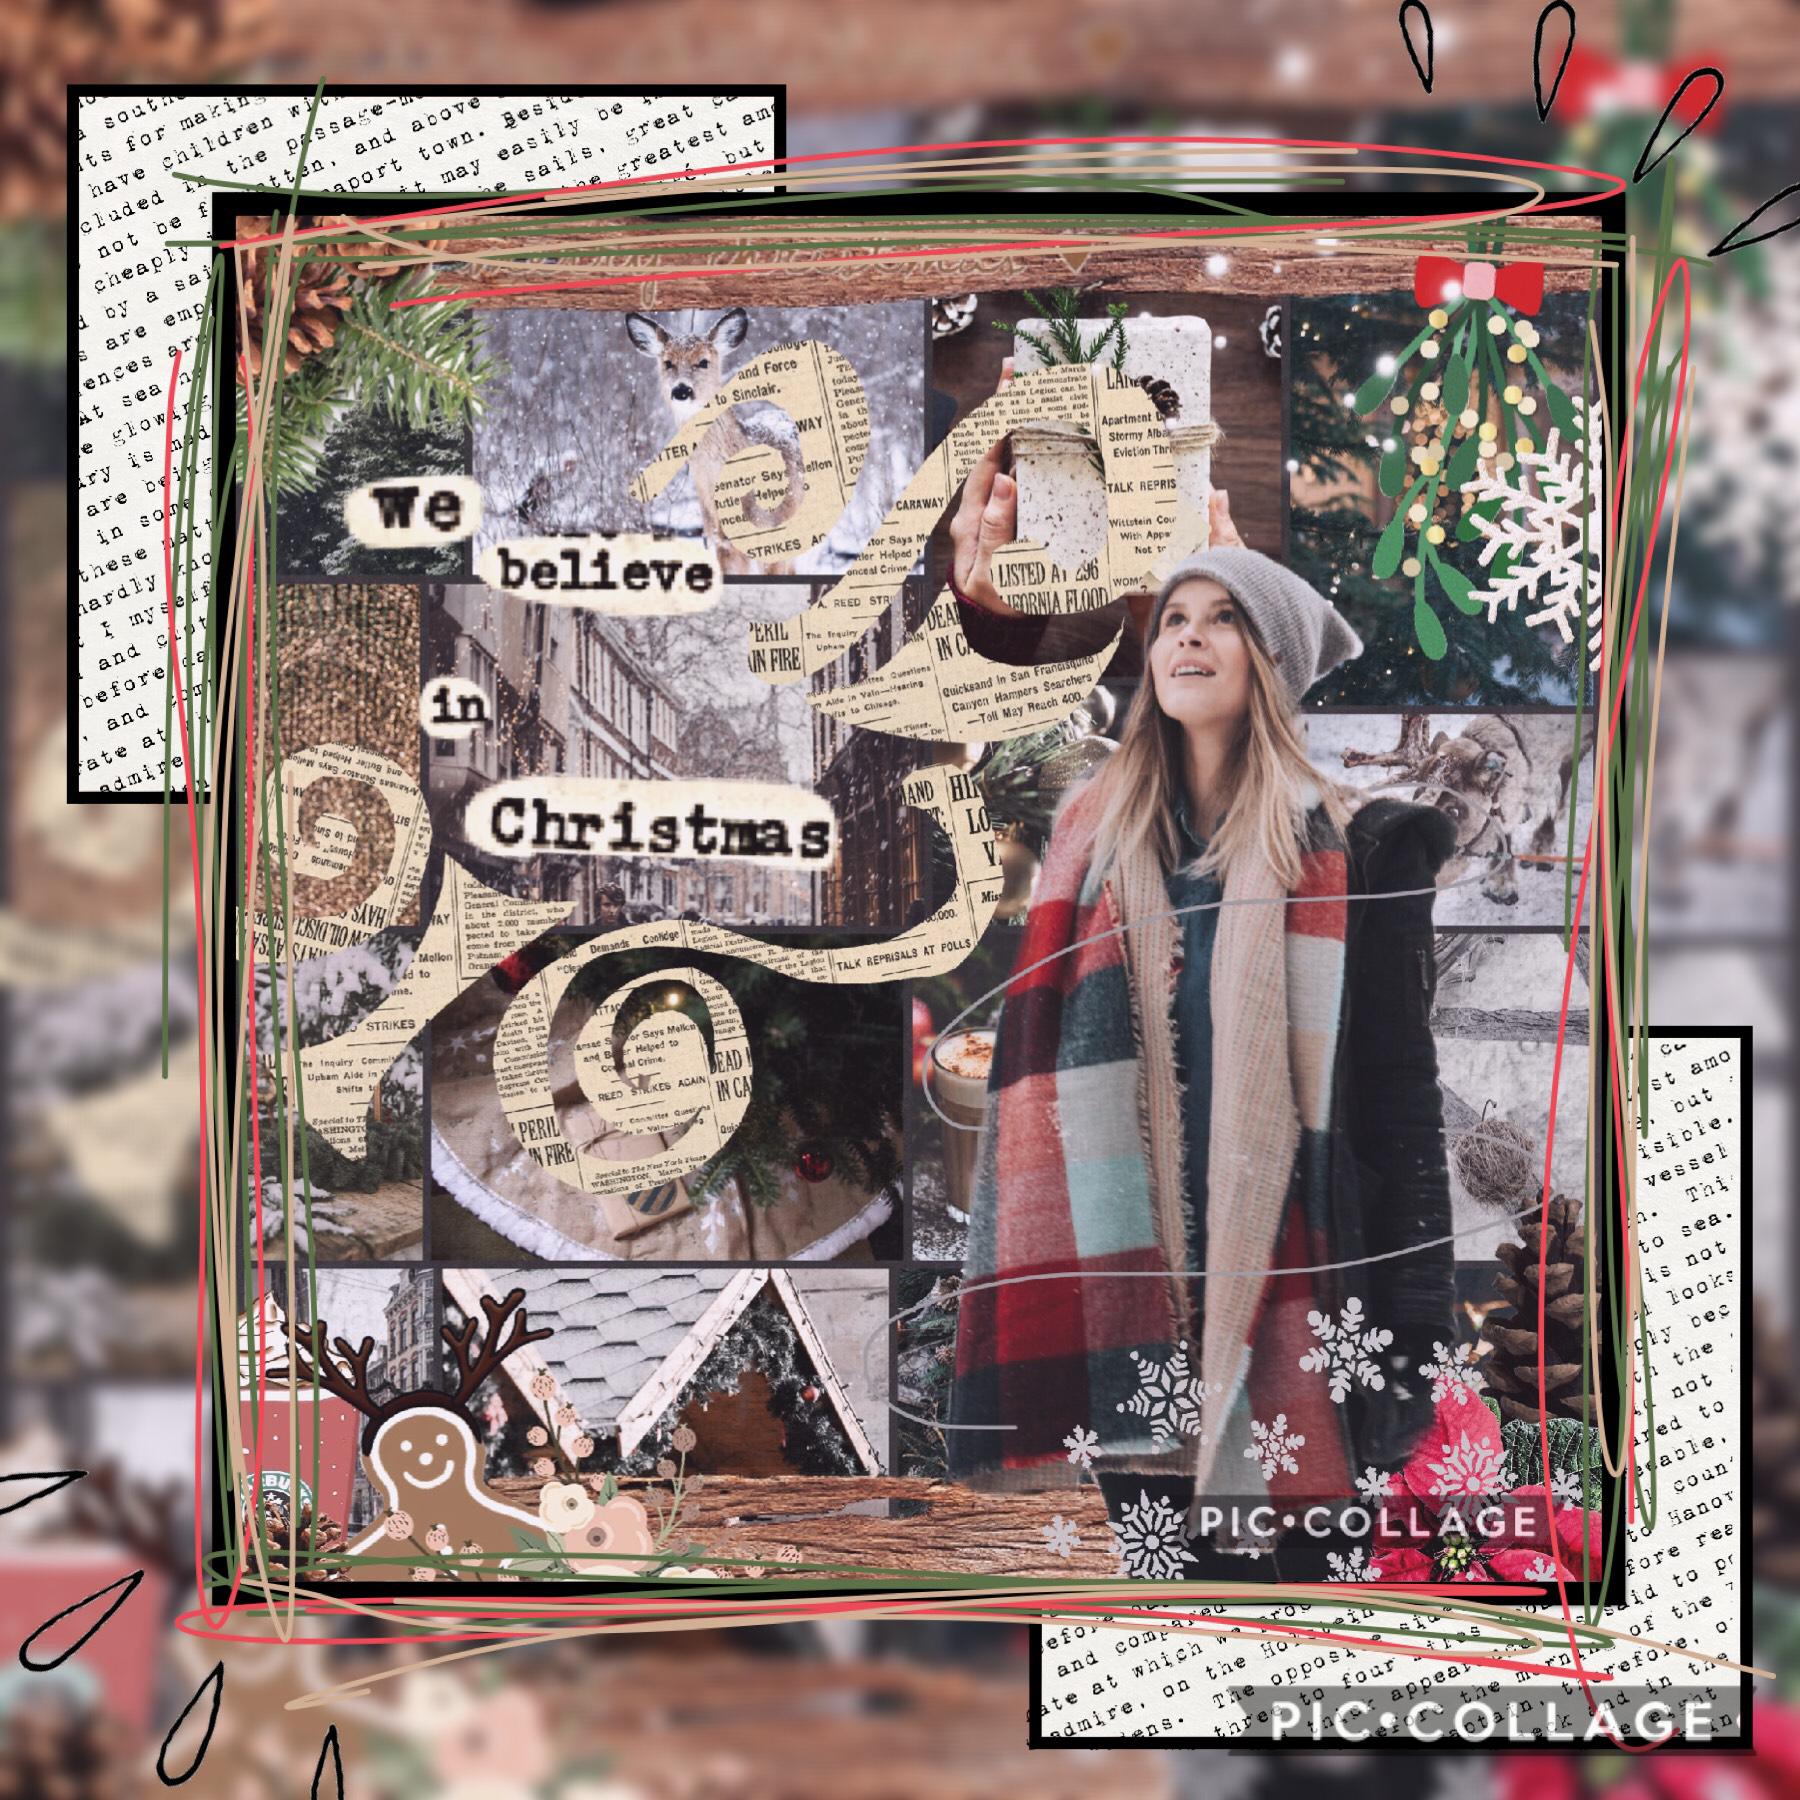 CHRISTMAS!!,
I LOVE Christmas soooo much!! 😂😱❤️ 
This is my entry into Wunderlust’s  contest (go enter it!)
Have an amazing night everyone!